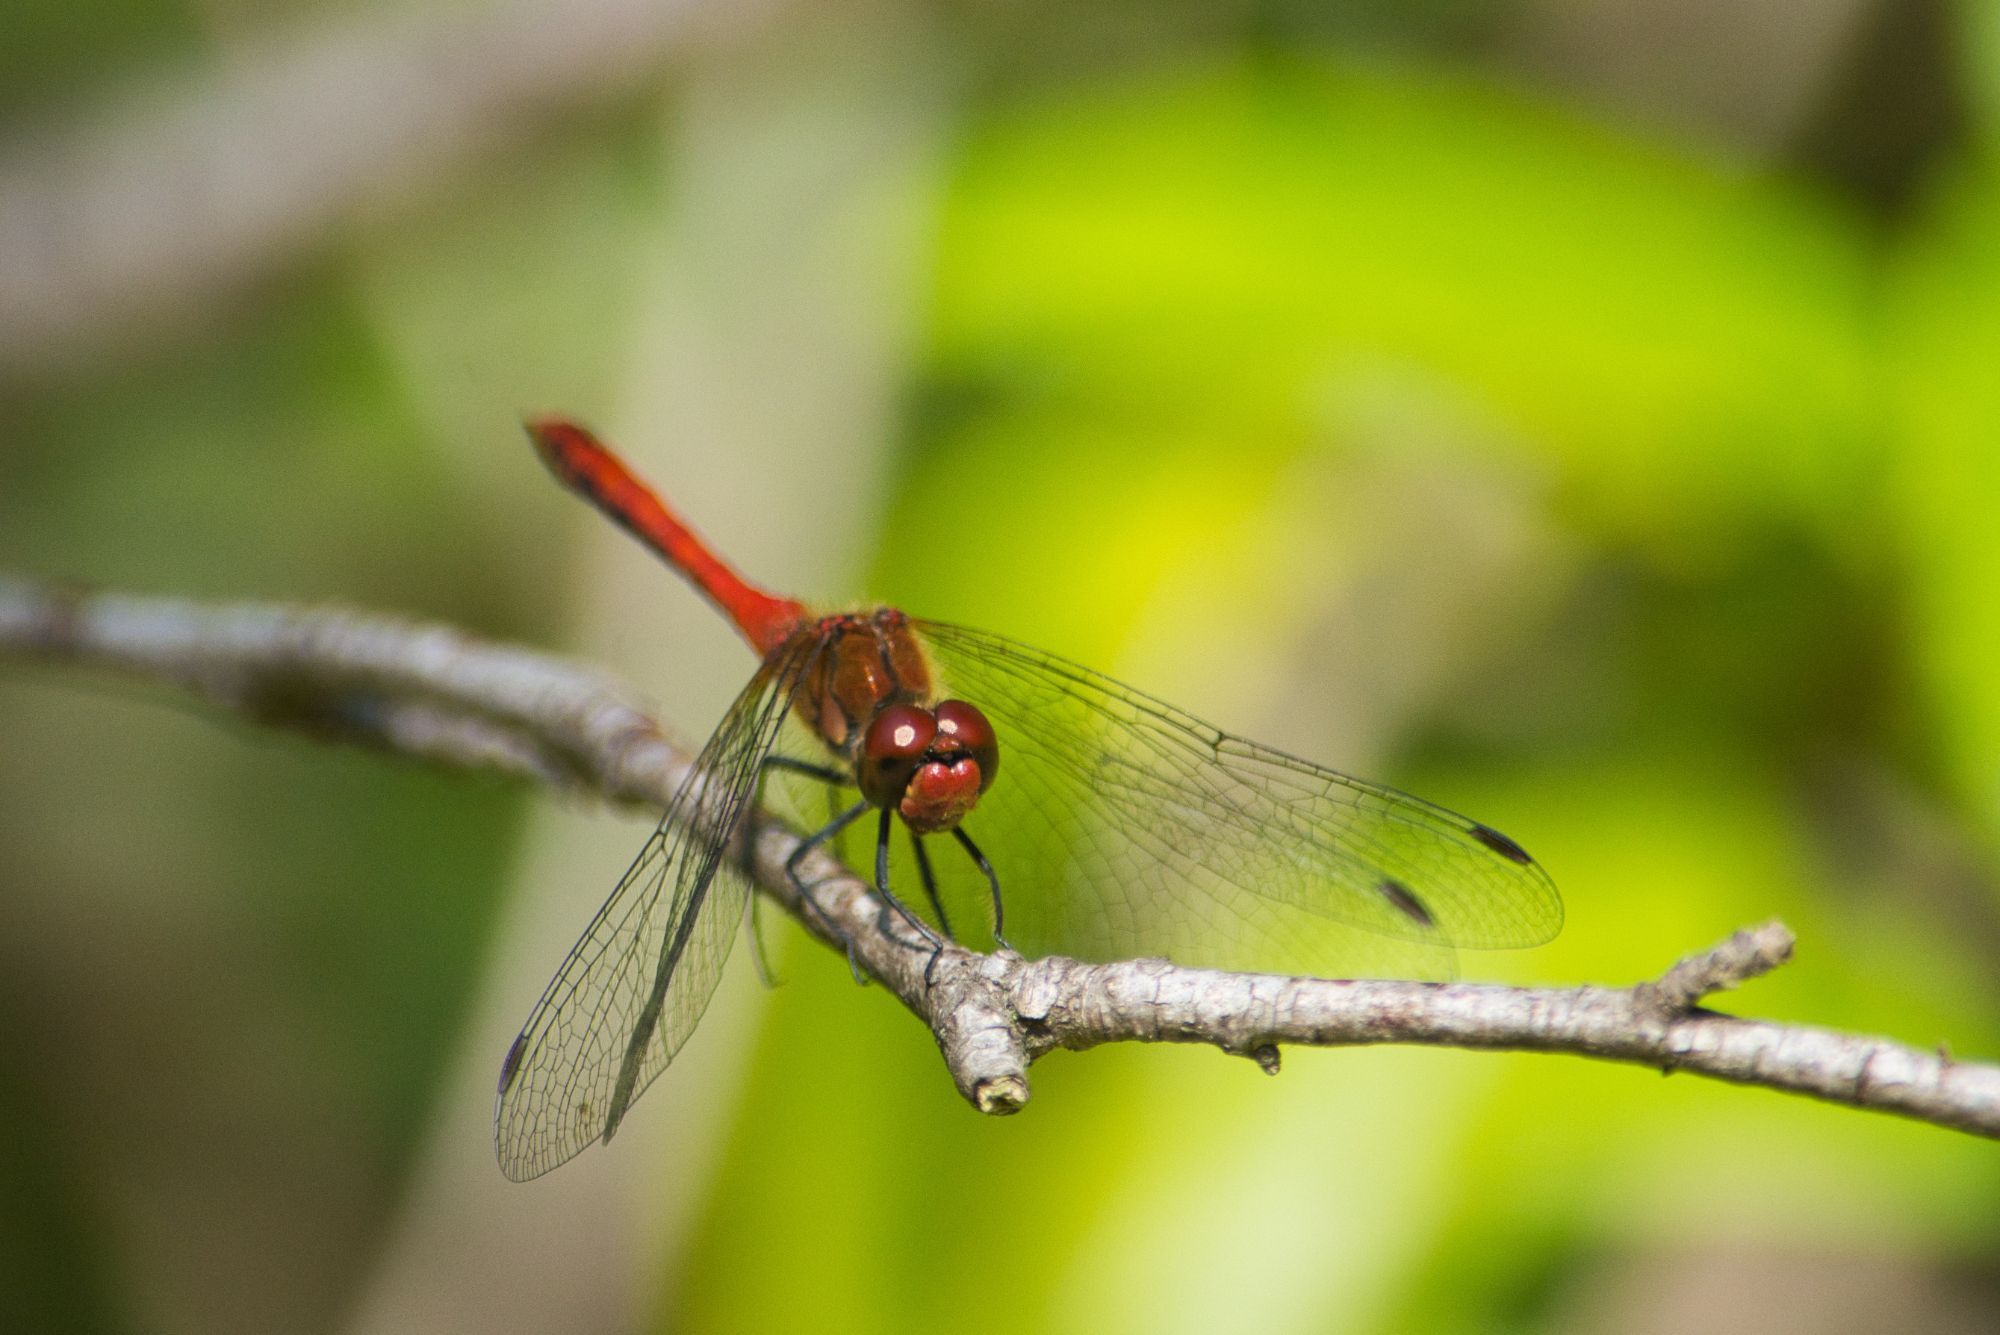 Dragonfly photography by Brecht De Ruyte